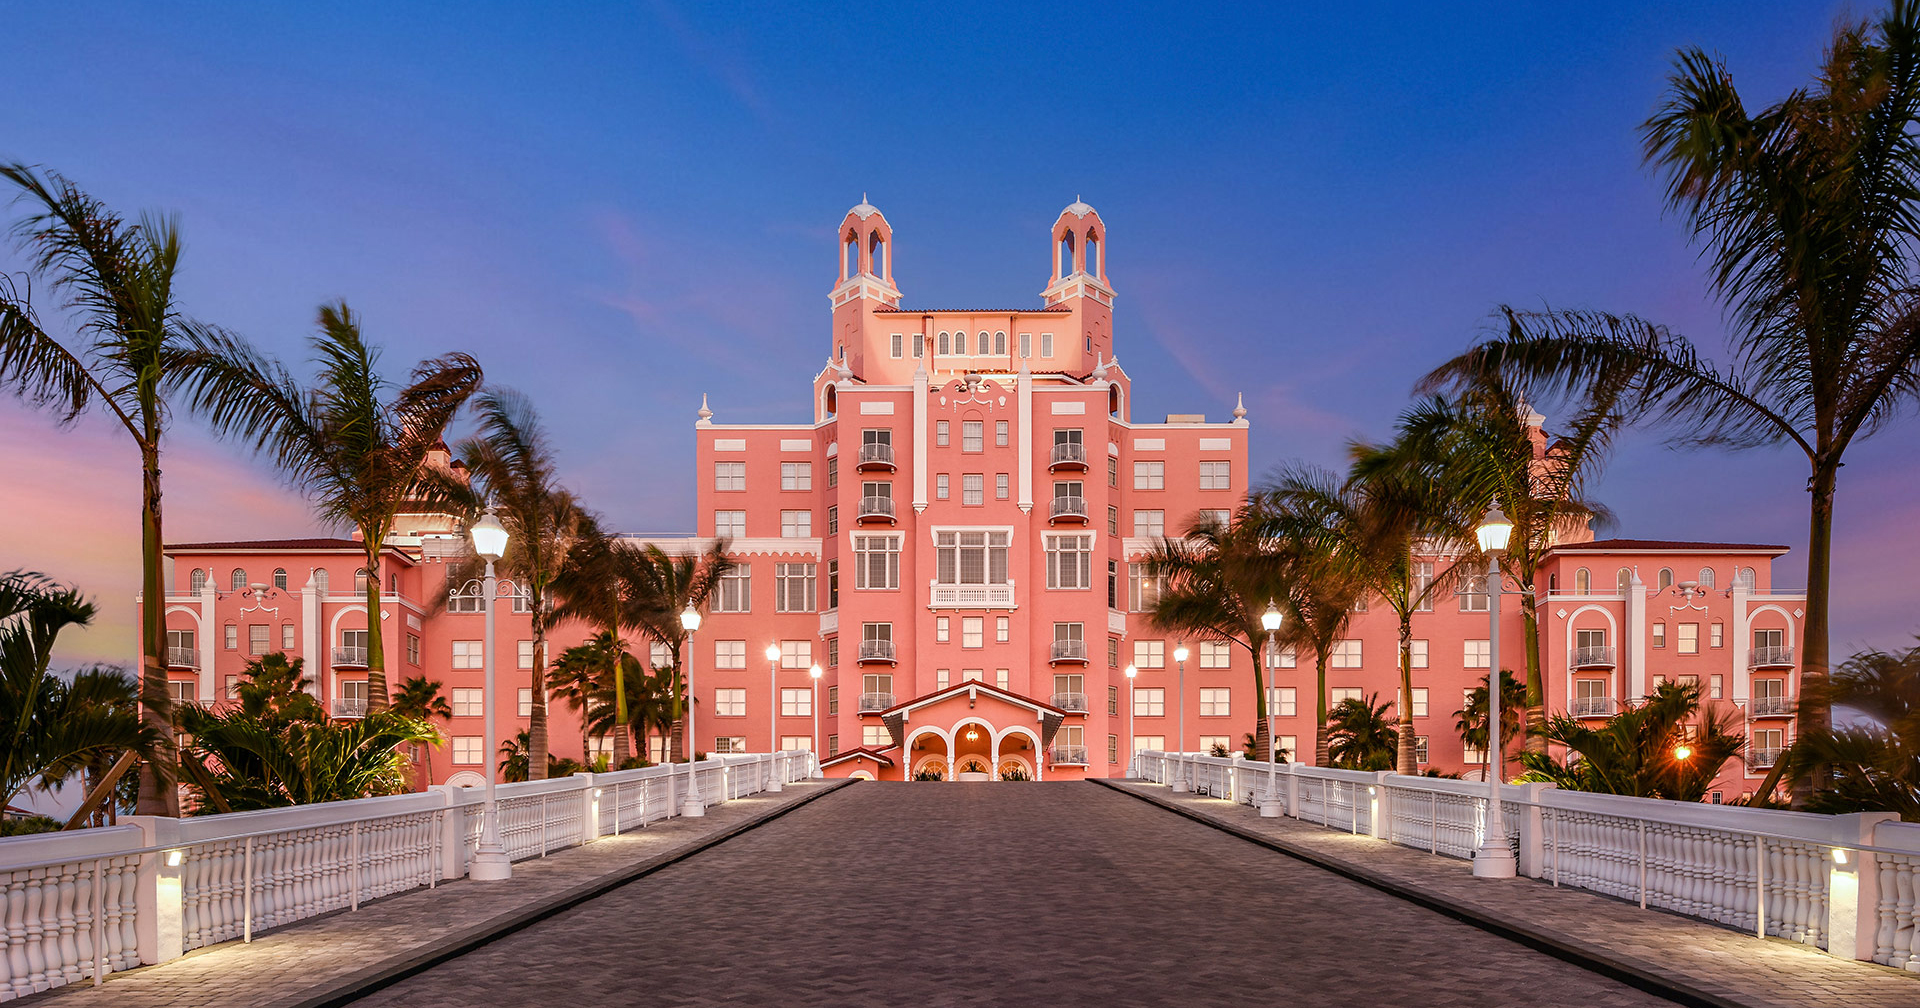 Architecture Transformed How the Iconic Don CeSar Hotel Was Made